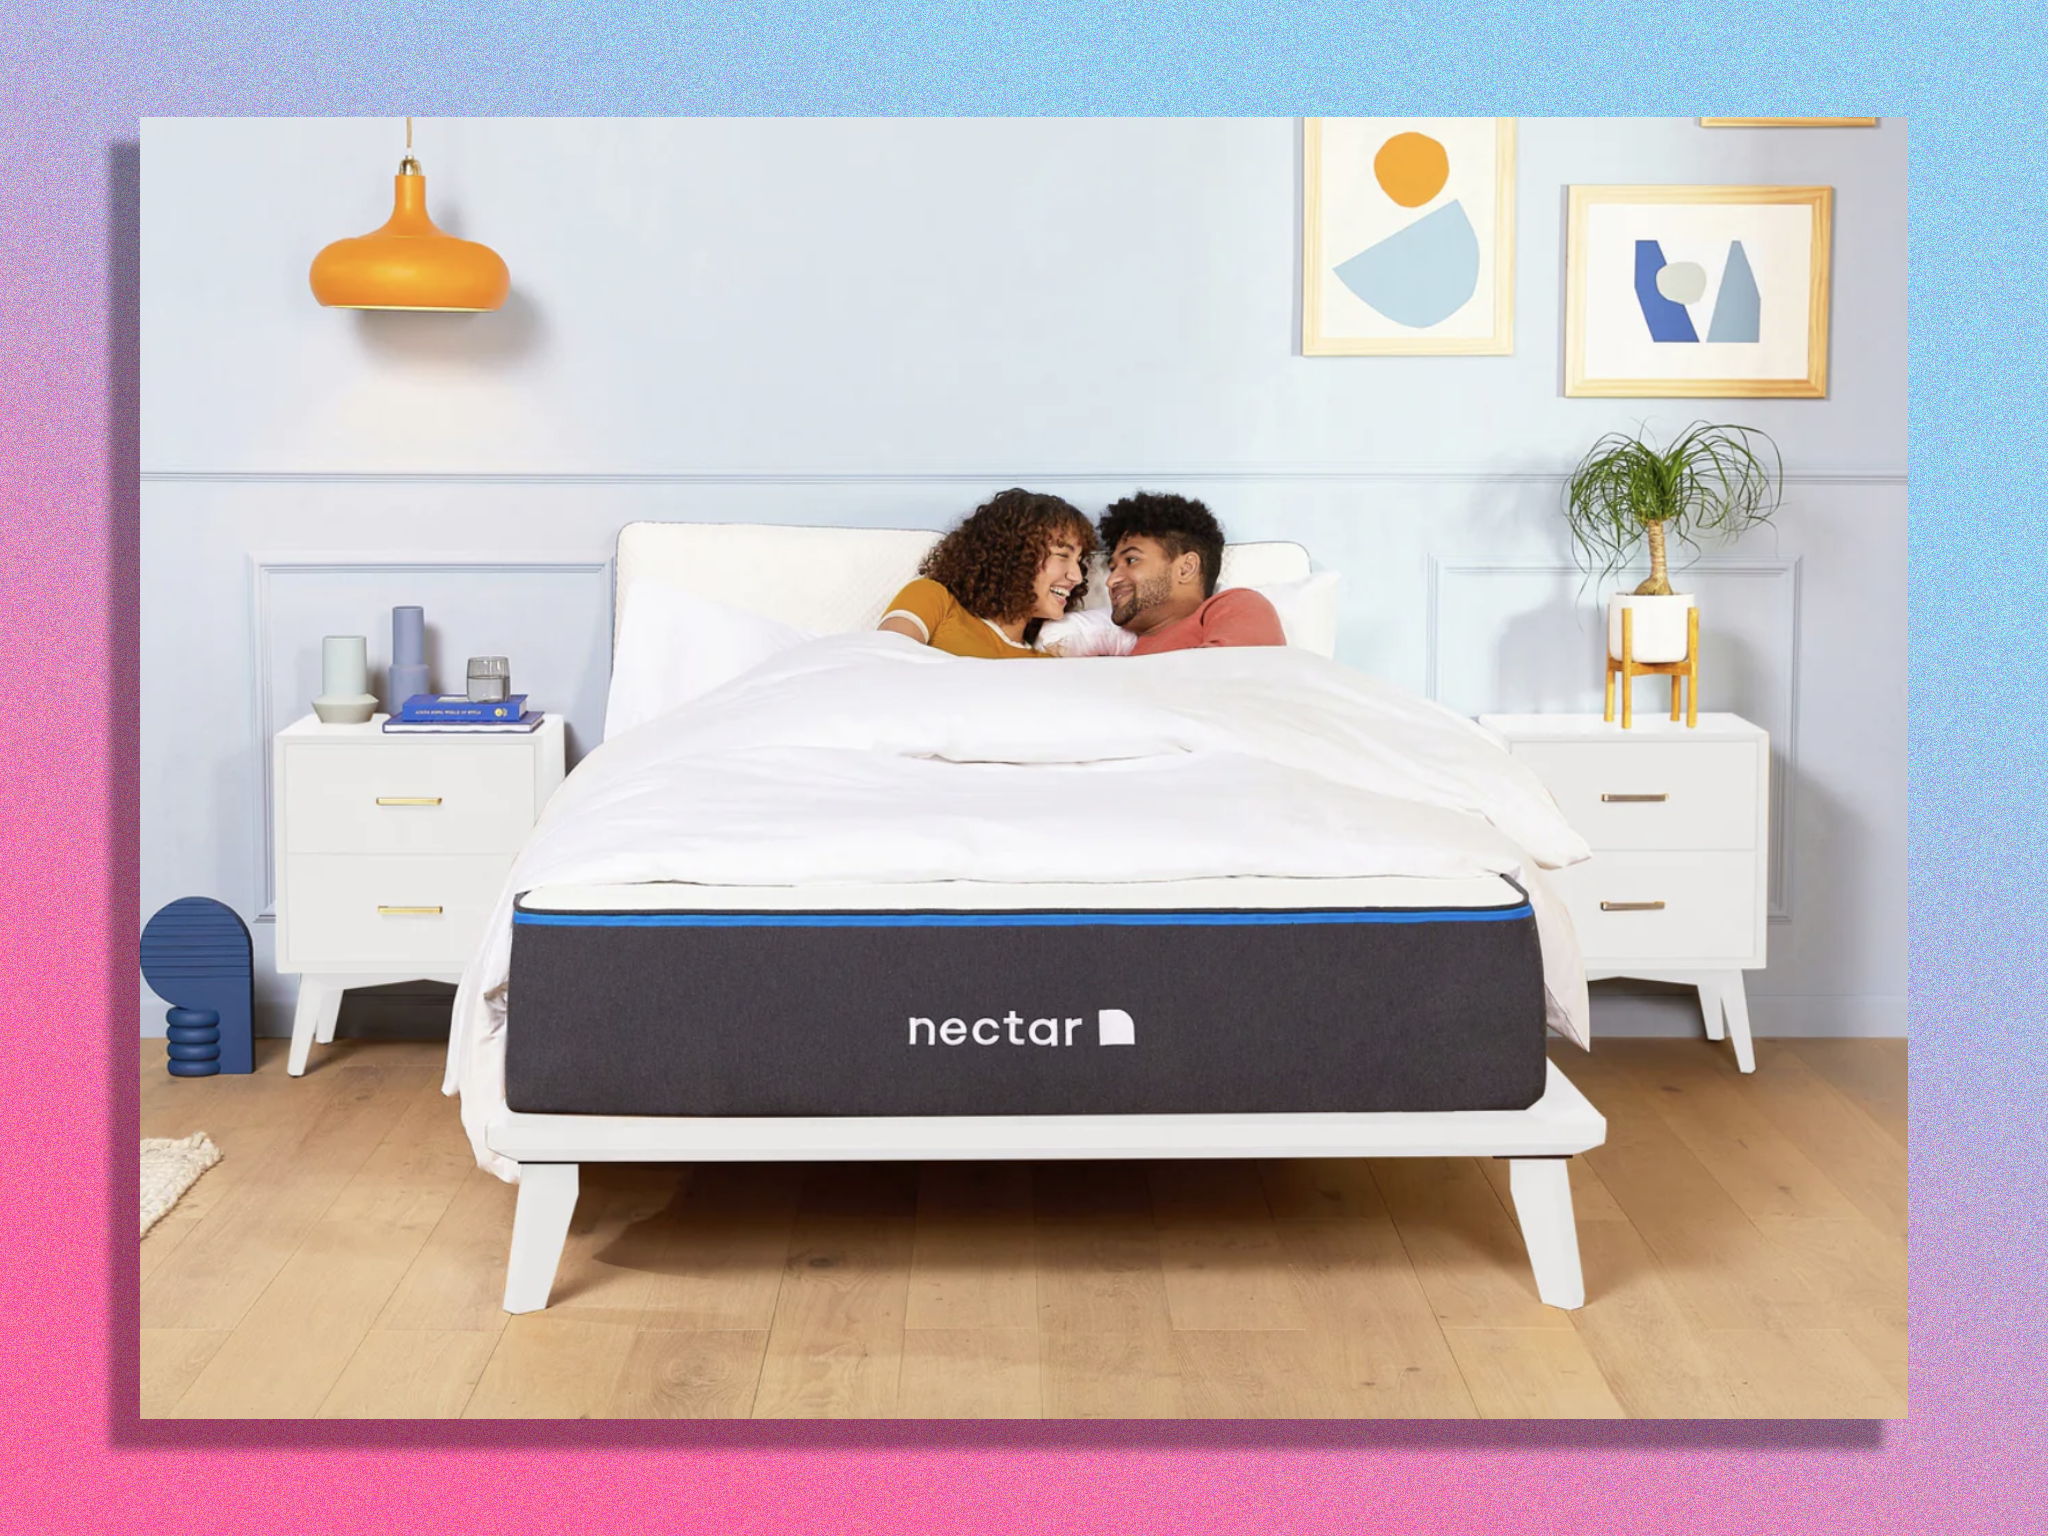 There’s a lifetime warranty, which means Nectar will replace your mattress if it’s faulty within the first 10 years